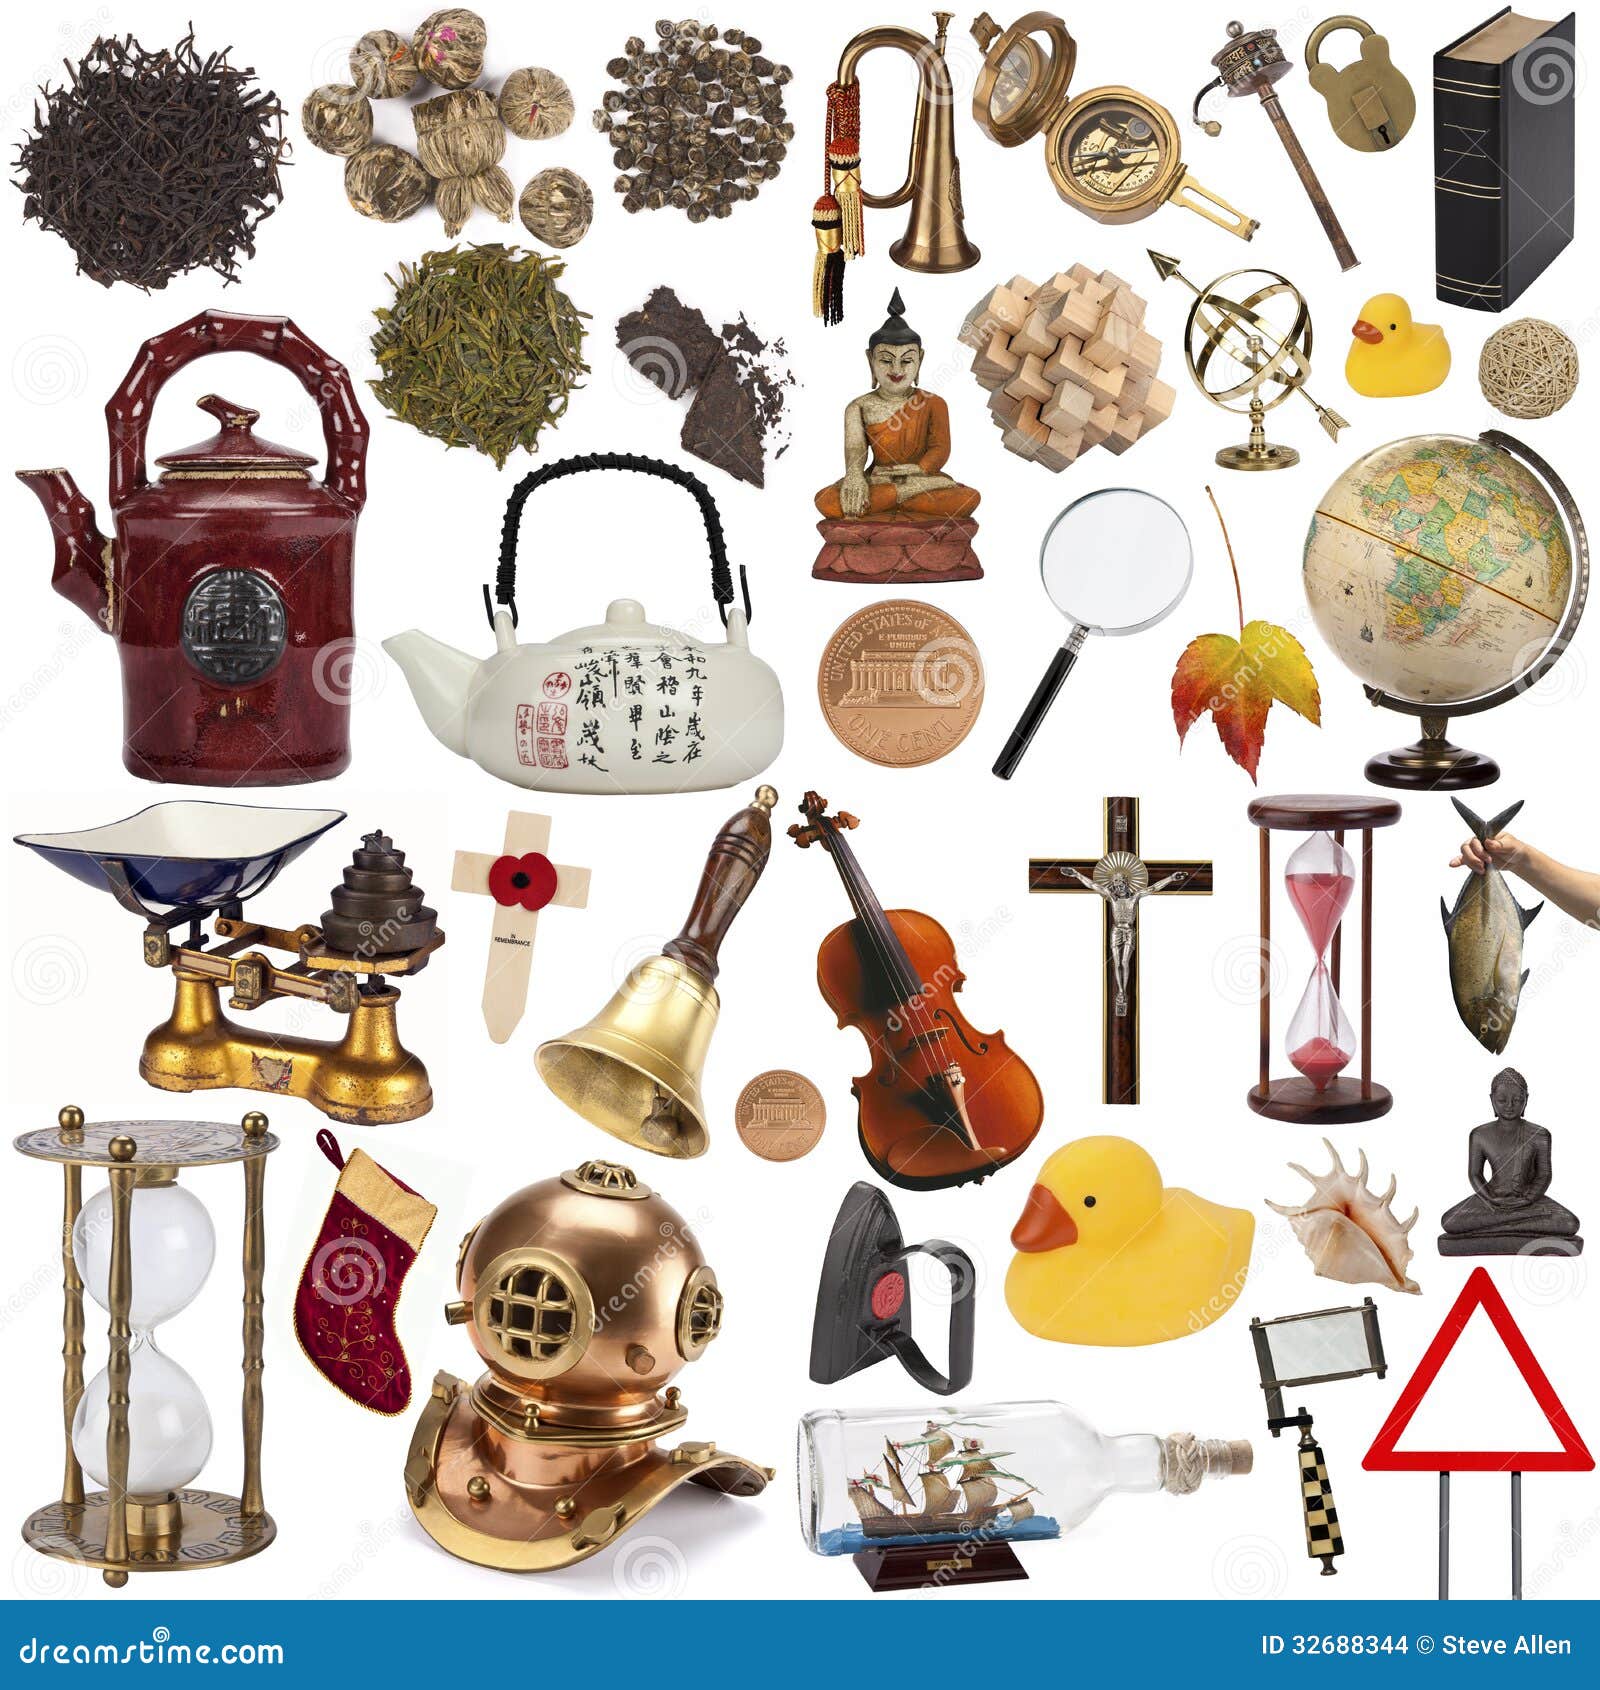 objects for cut out - 